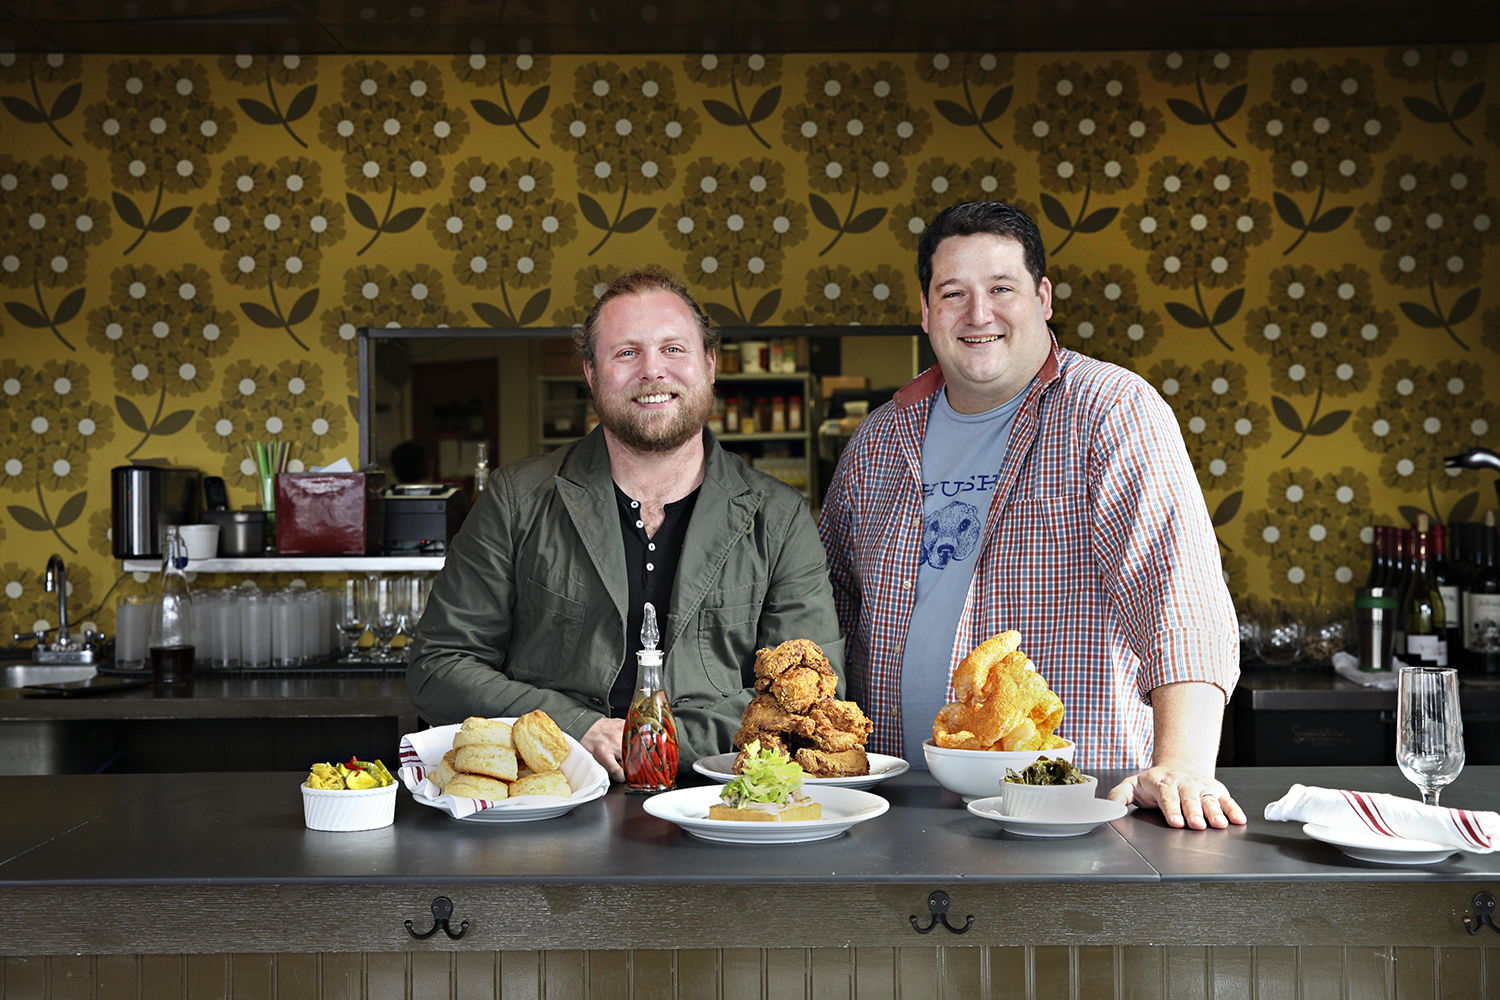 Nick Rancone is on the left, curly blonde hair in a pony tail wearing a suit jacked over a black Henley, Thomas Boemer on the right, with close cropped brown hair, a plaid shirt unbuttoned over a blue t-shirt. In front of them is a spread of Revival dishes including crispy fried chicken